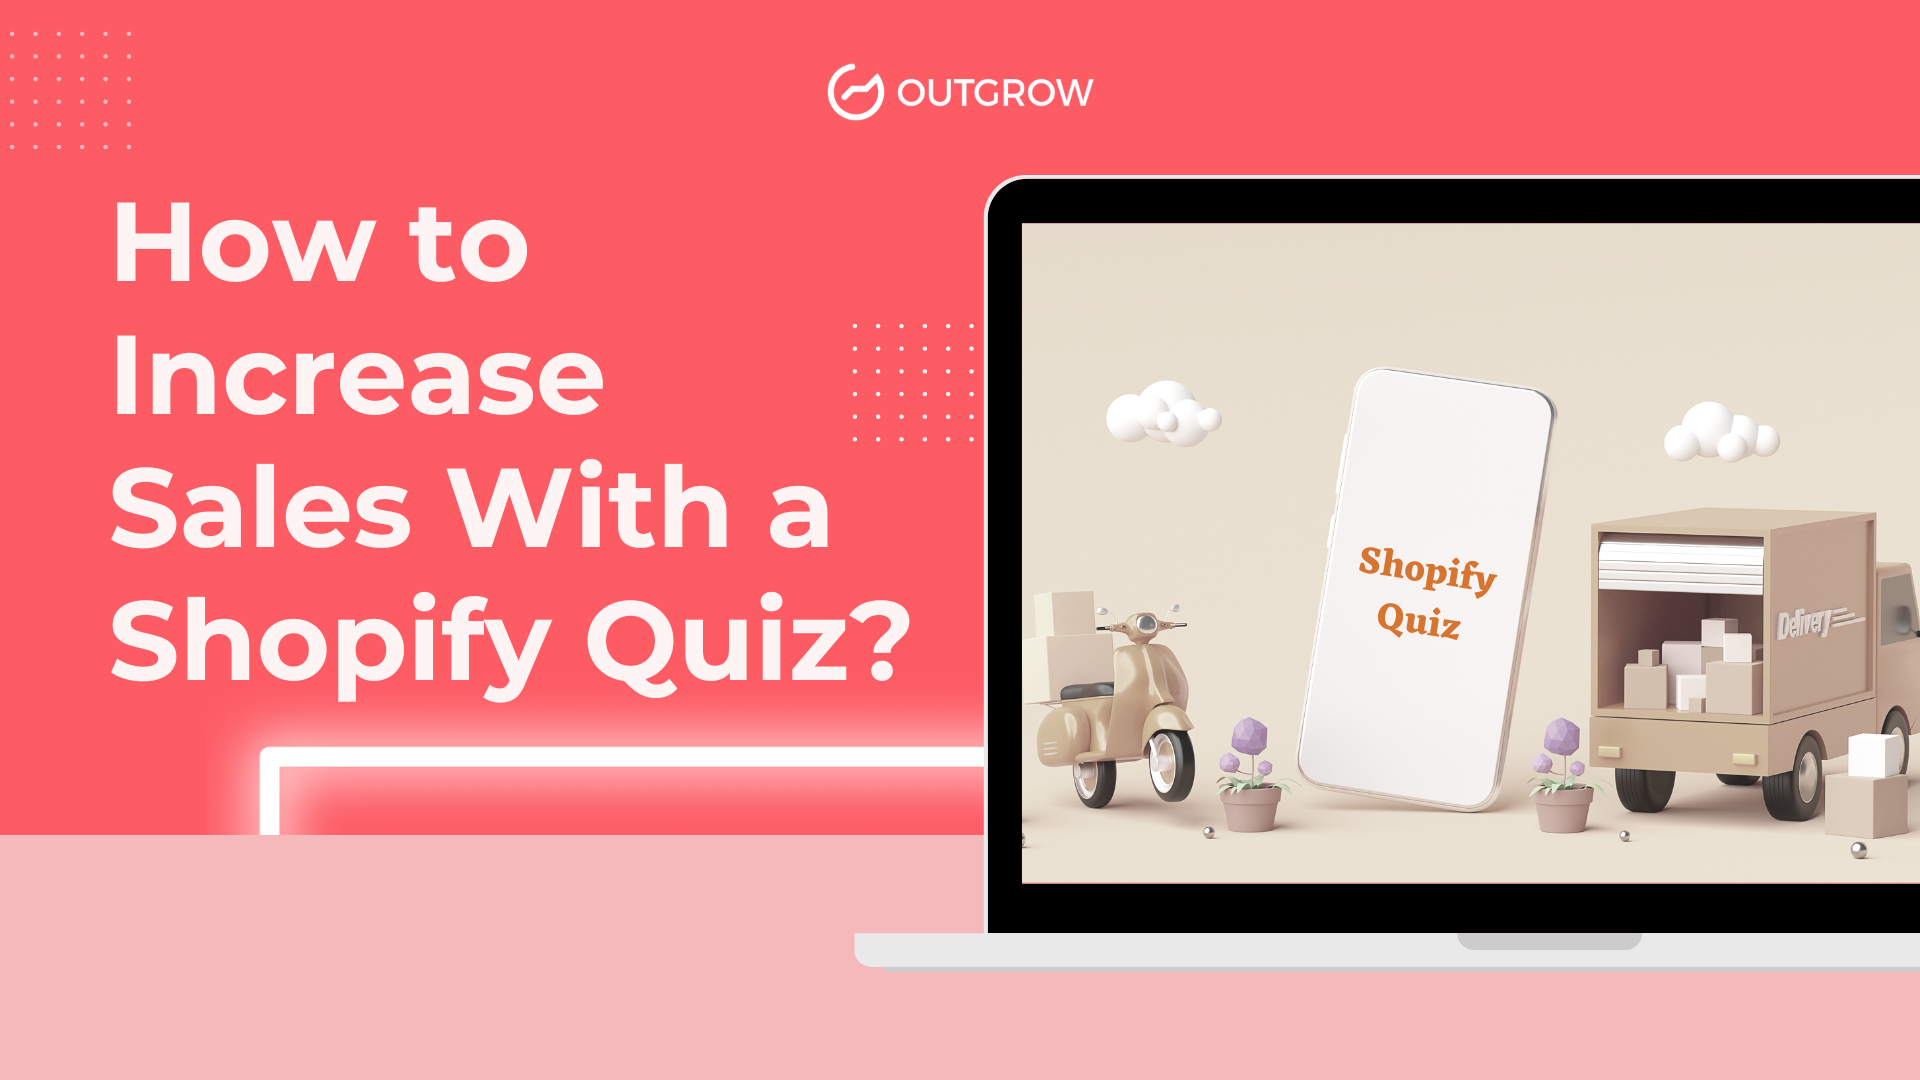 How to Increase Sales With a Shopify Quiz